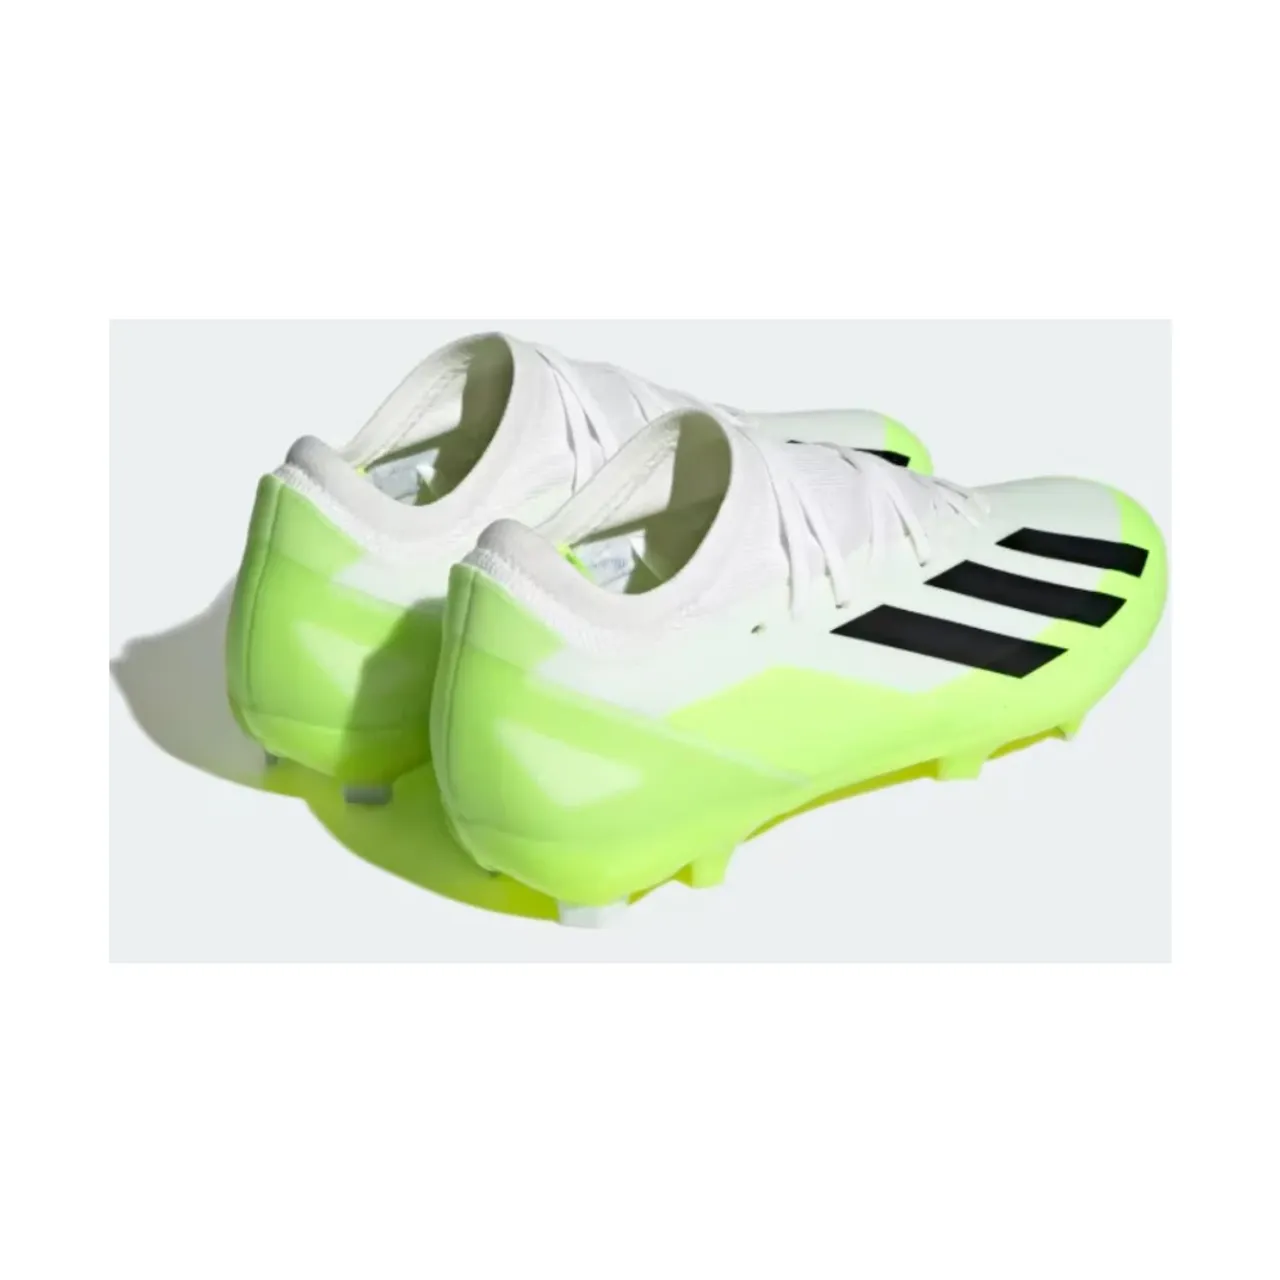 Adidas , Lightweight Football Shoes for Crazy Speed ,White male, Sizes: